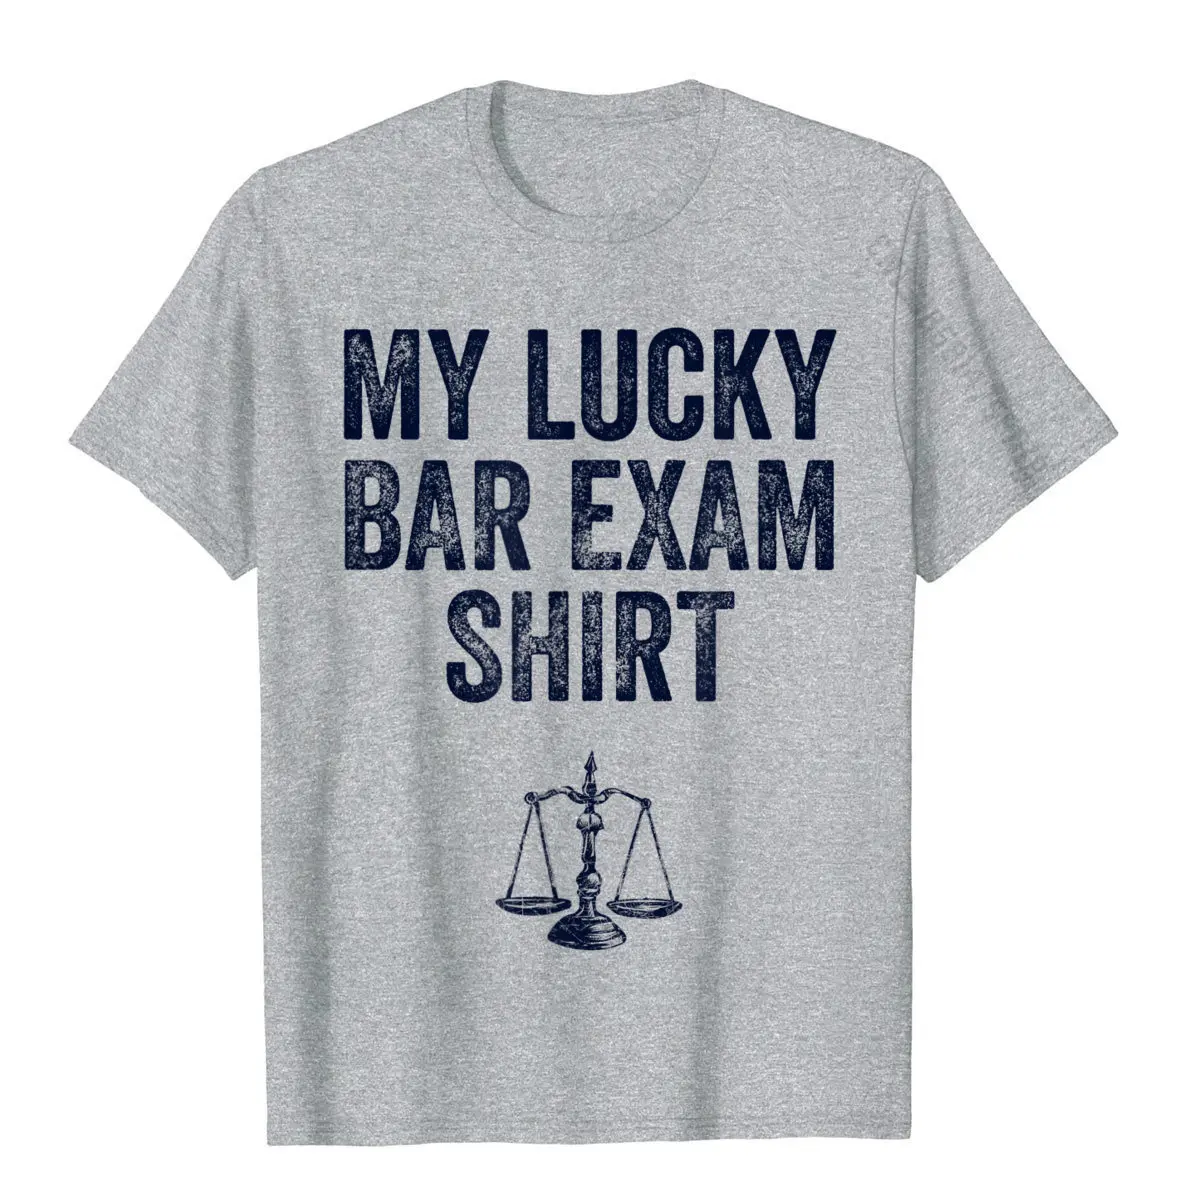 Bar Exam Shirt Funny Law School Graduation Gifts For Him Her T-Shirt Slim Fit Tshirts For Men Cotton Tops Shirt Casual Company